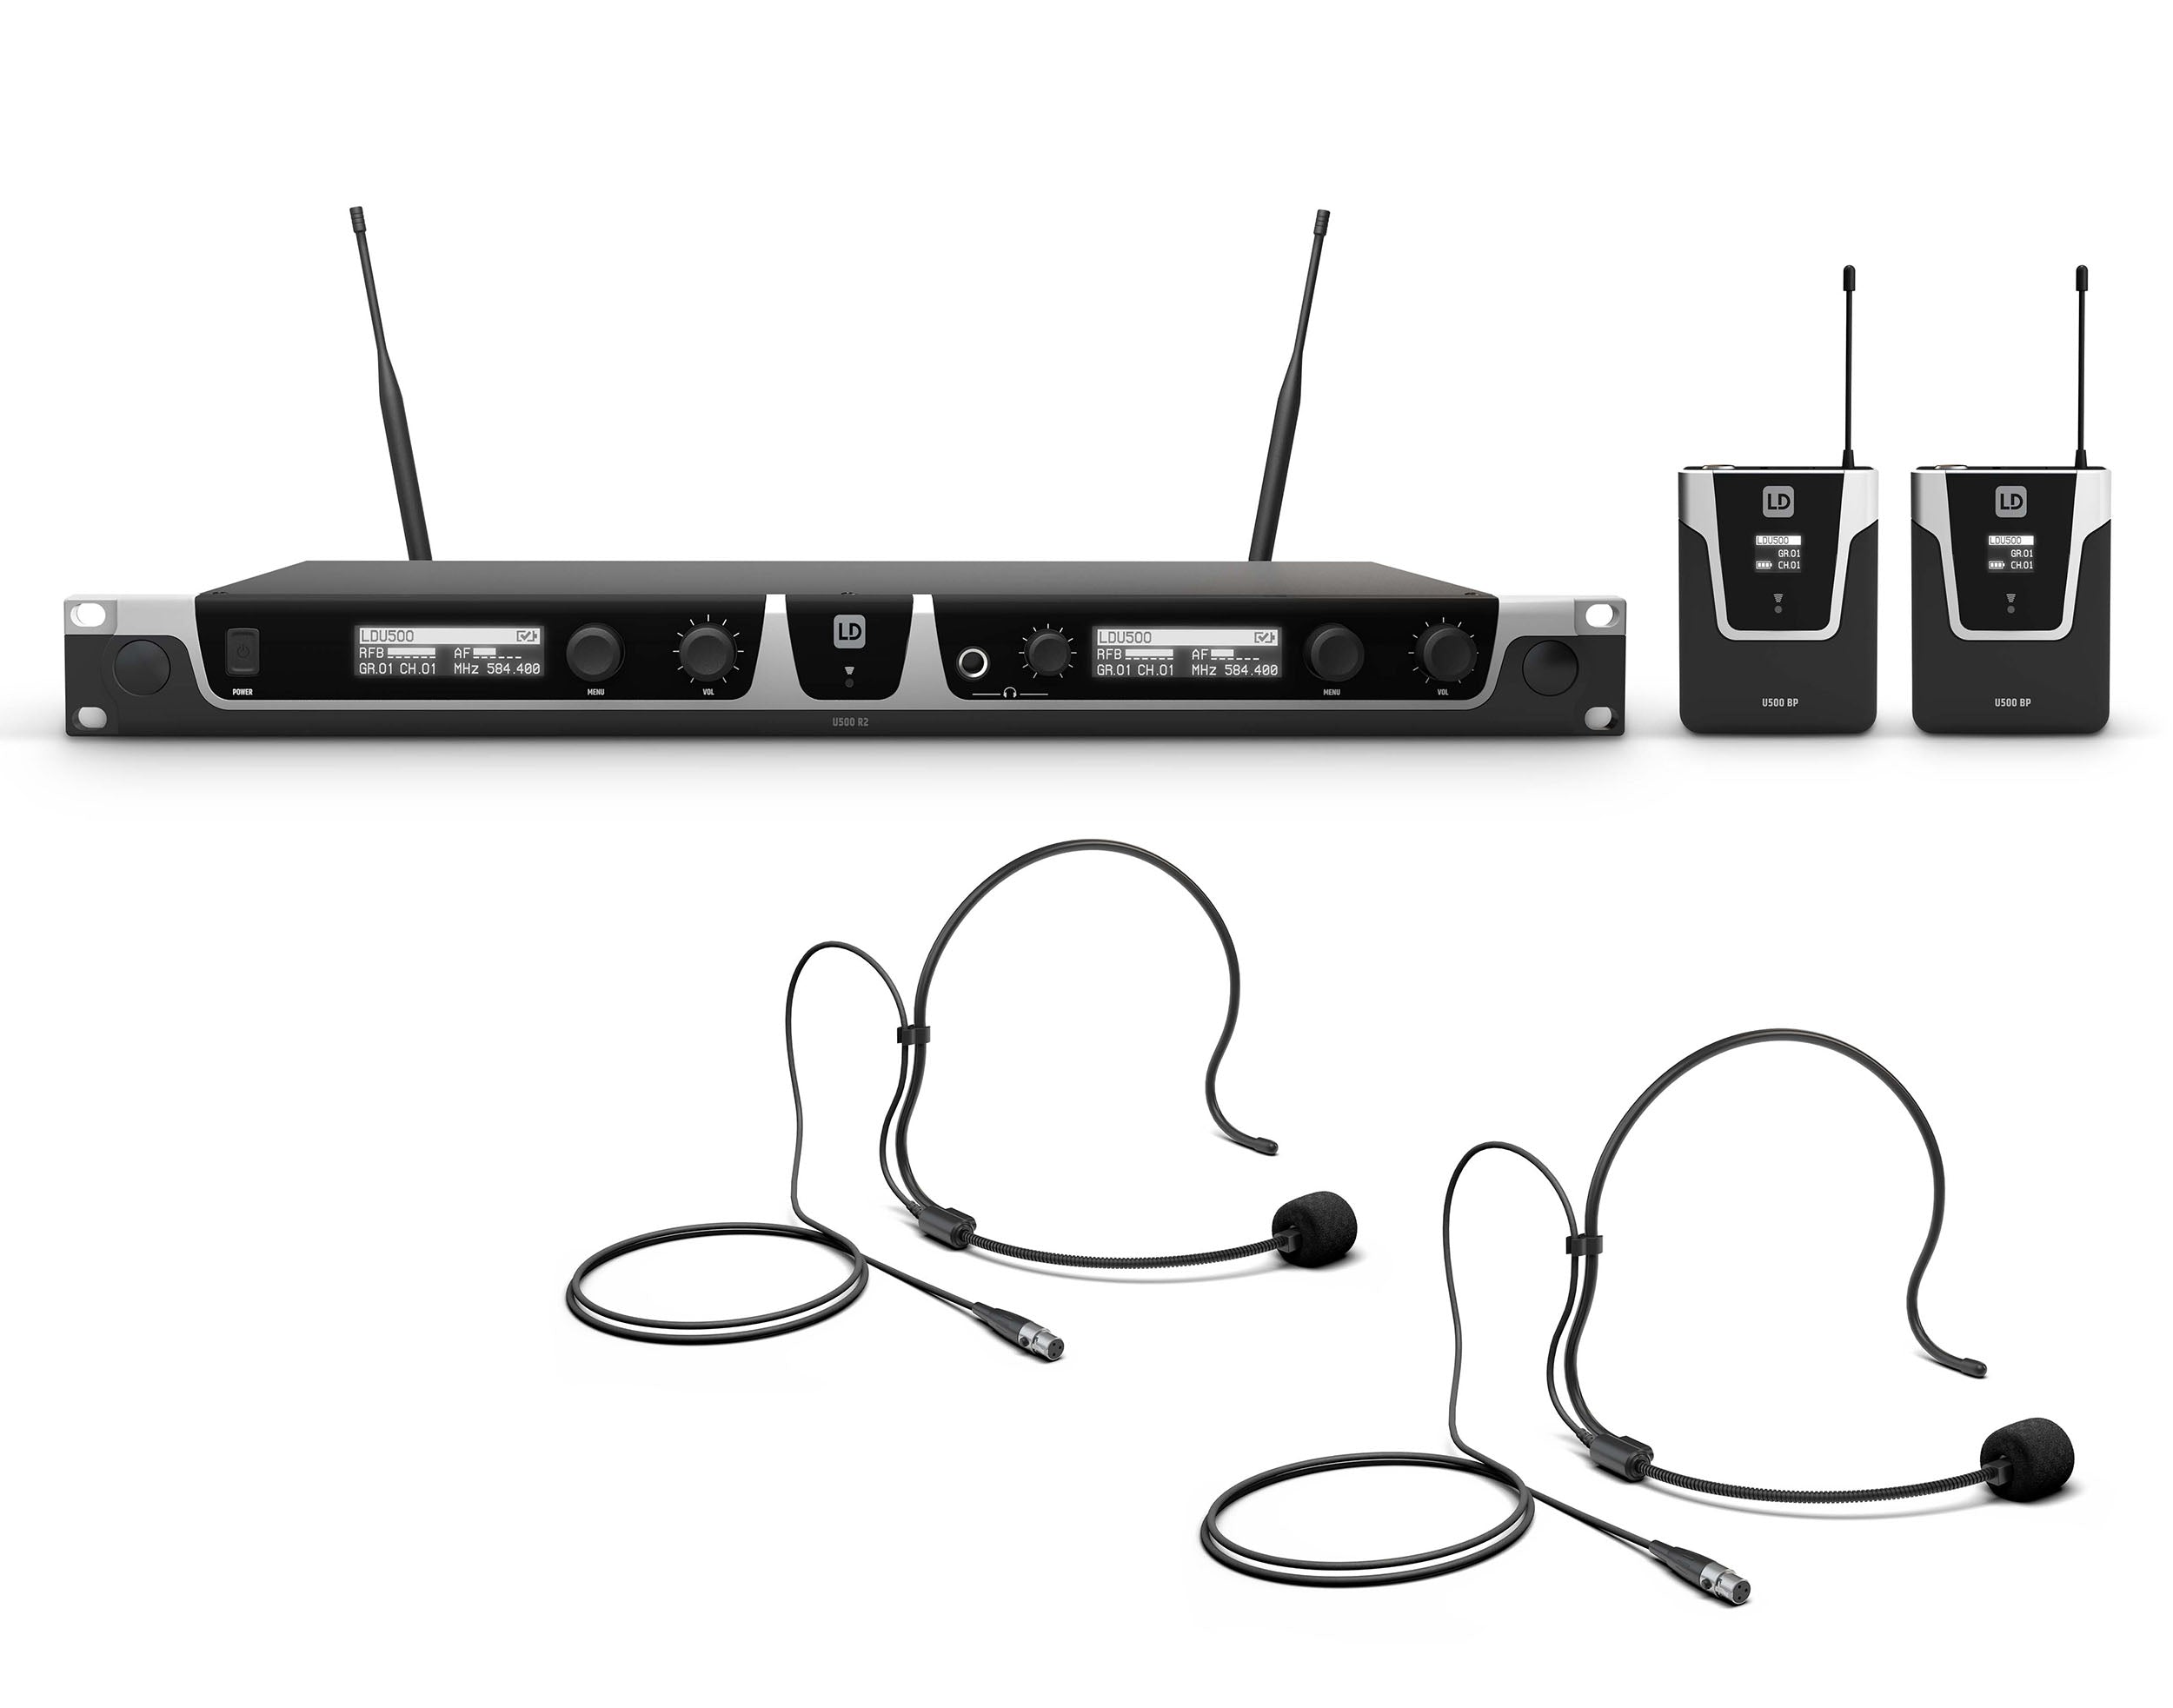 LD Systems U504.7 BPH 2 US, Wireless Microphone System with 2 x Bodypack and 2 x Headset - 470 - 490 MHz by LD Systems